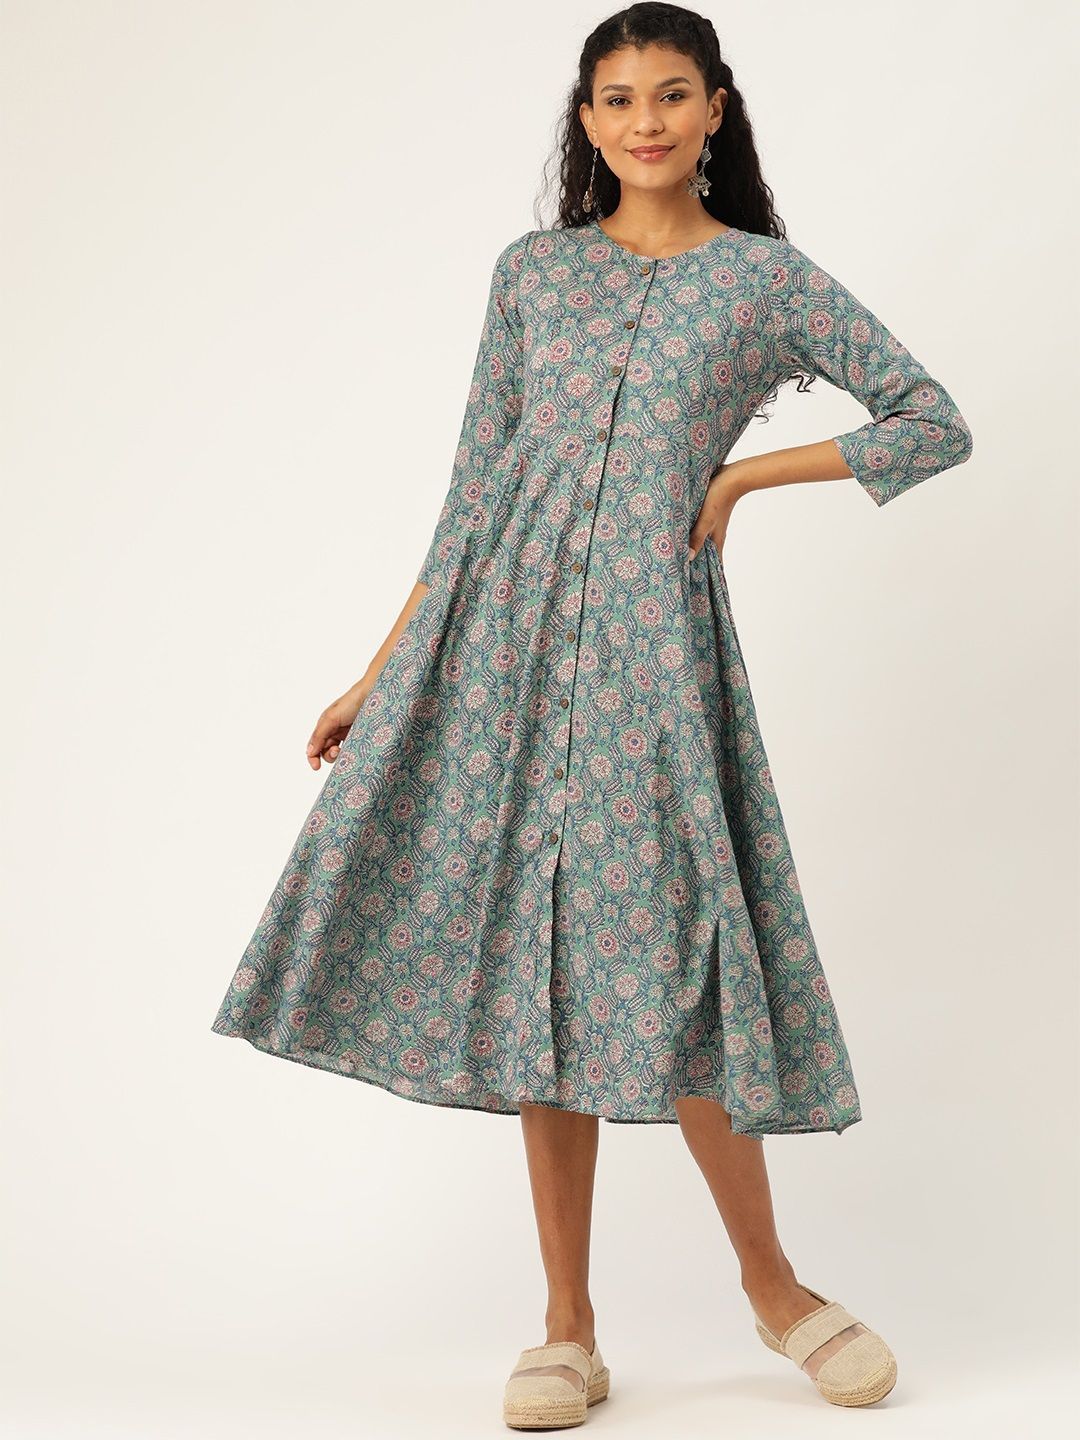 Shae by SASSAFRAS Women Green & Pink Ethnic Print A-Line Dress Price in India